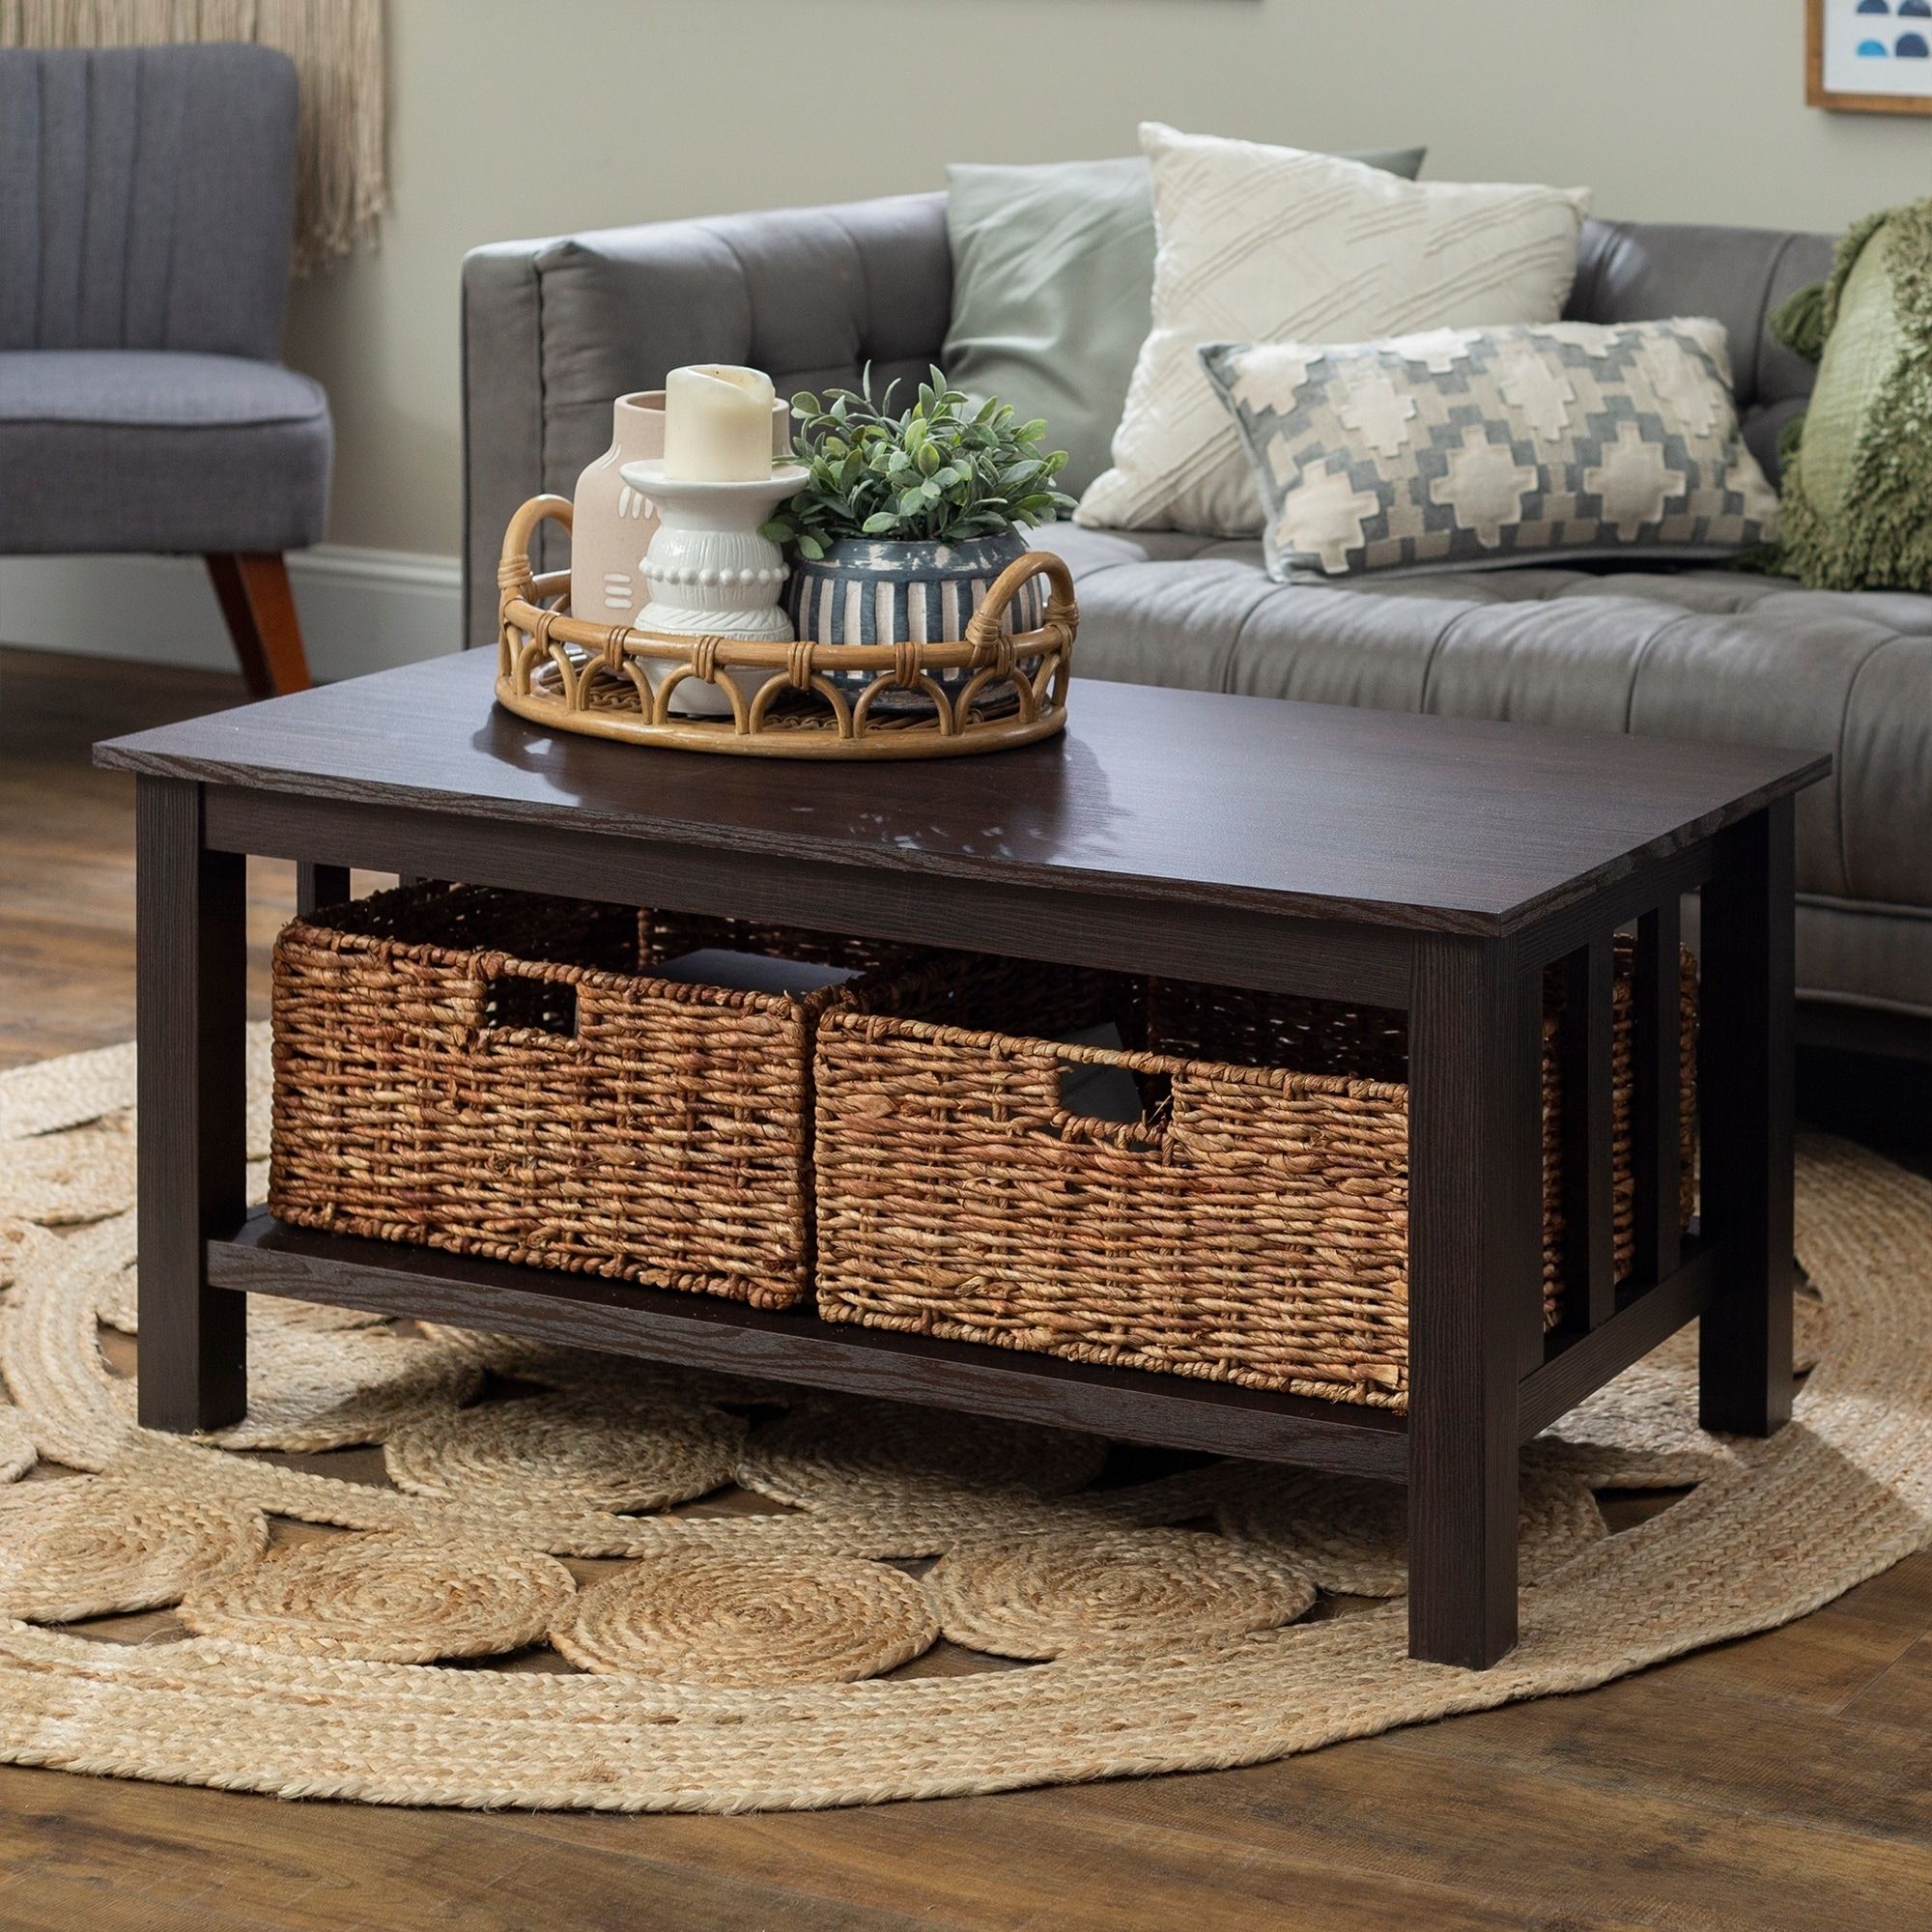 Coffee Tables With Storage – Hoolitriple In Coffee Tables With Open Storage Shelves (View 10 of 20)